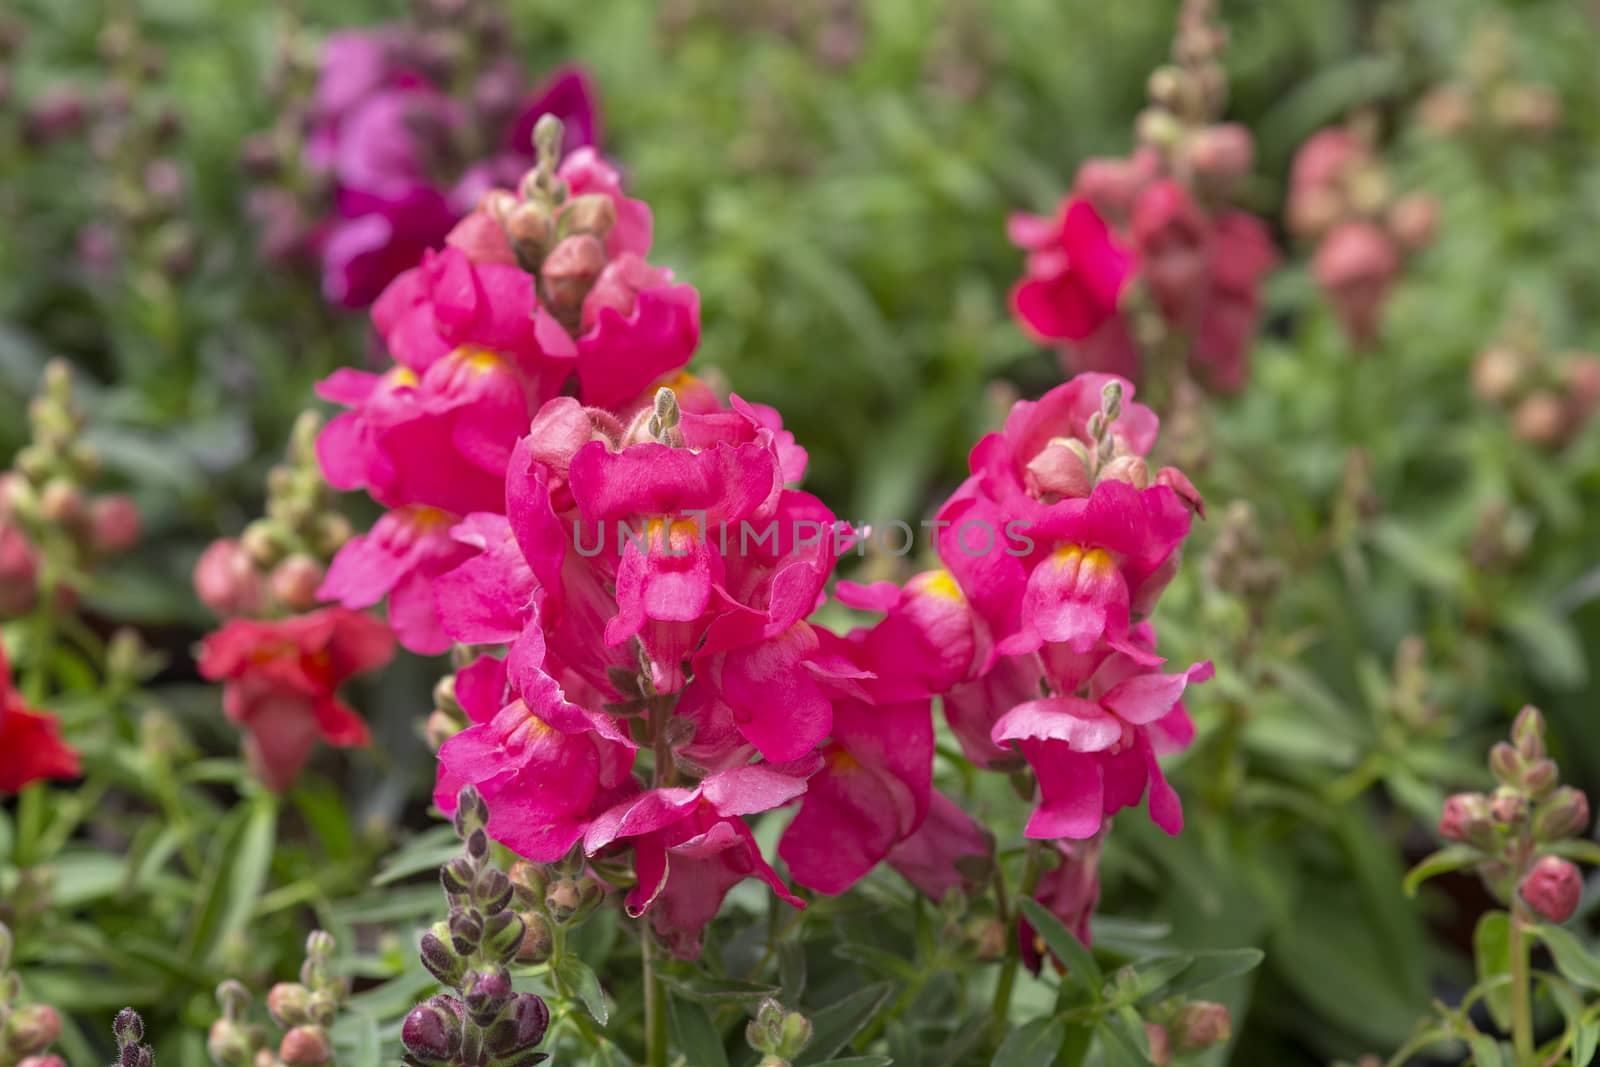 Colourful snapdragon flowers by ArtesiaWells